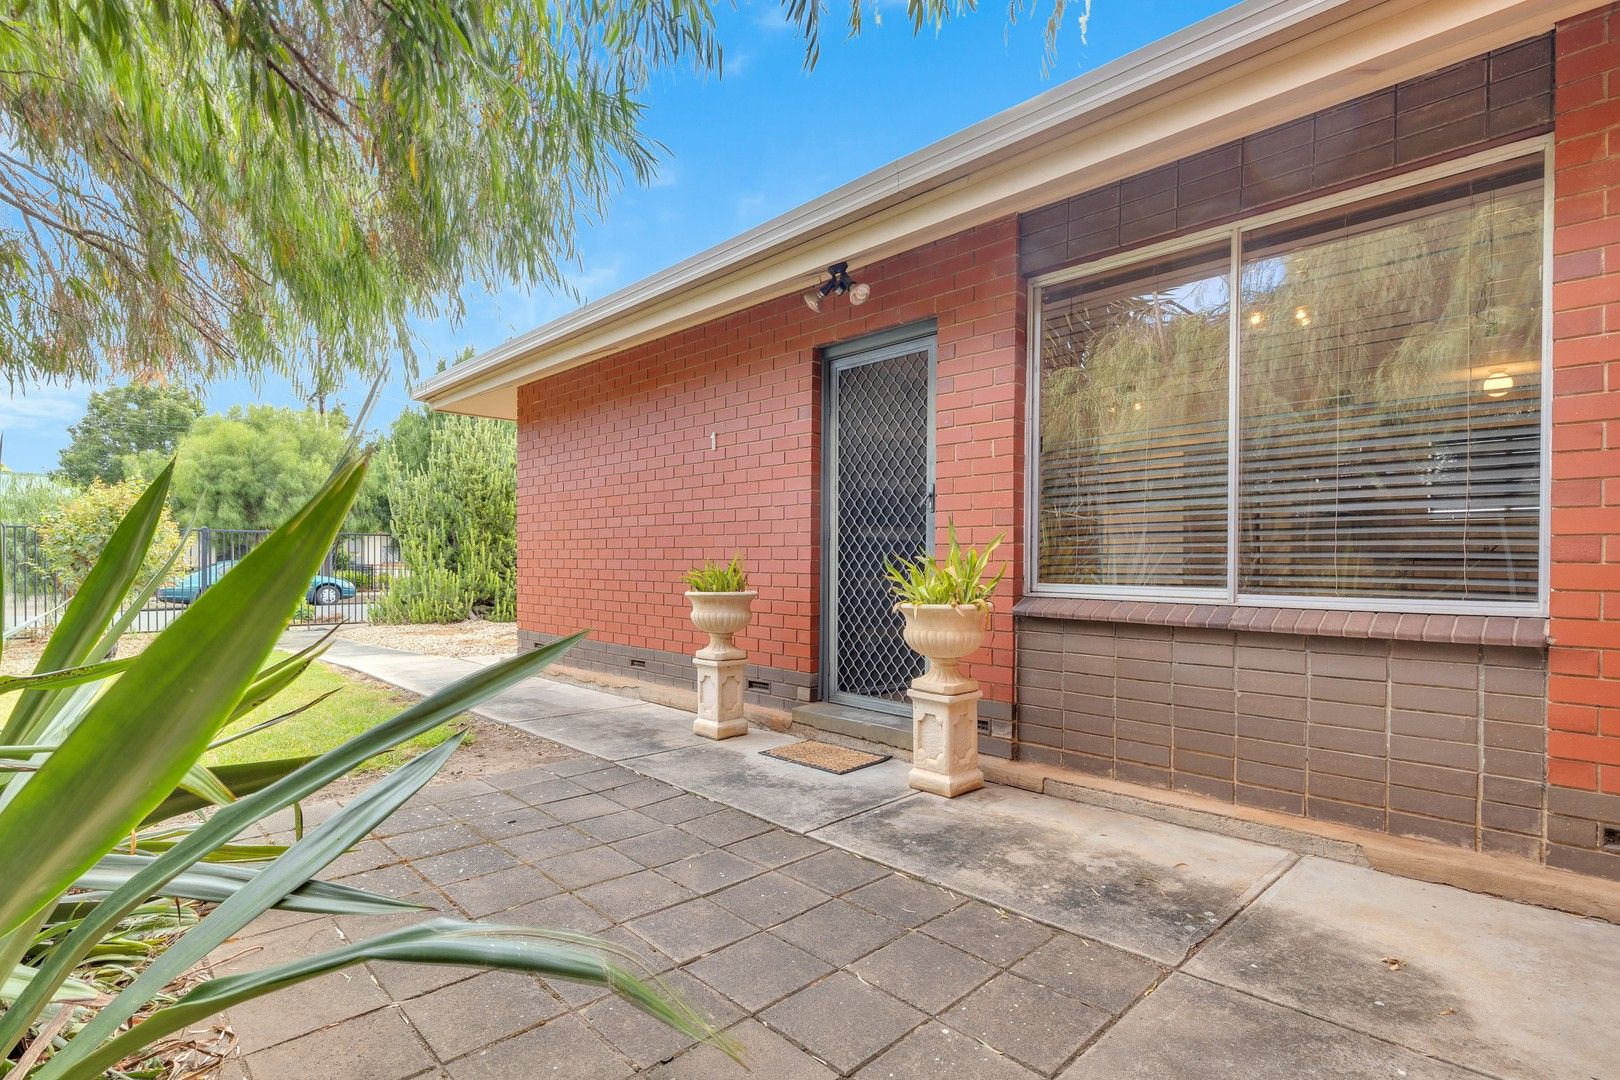 2 bedrooms House in 1/13 Waterman Terrace MITCHELL PARK SA, 5043